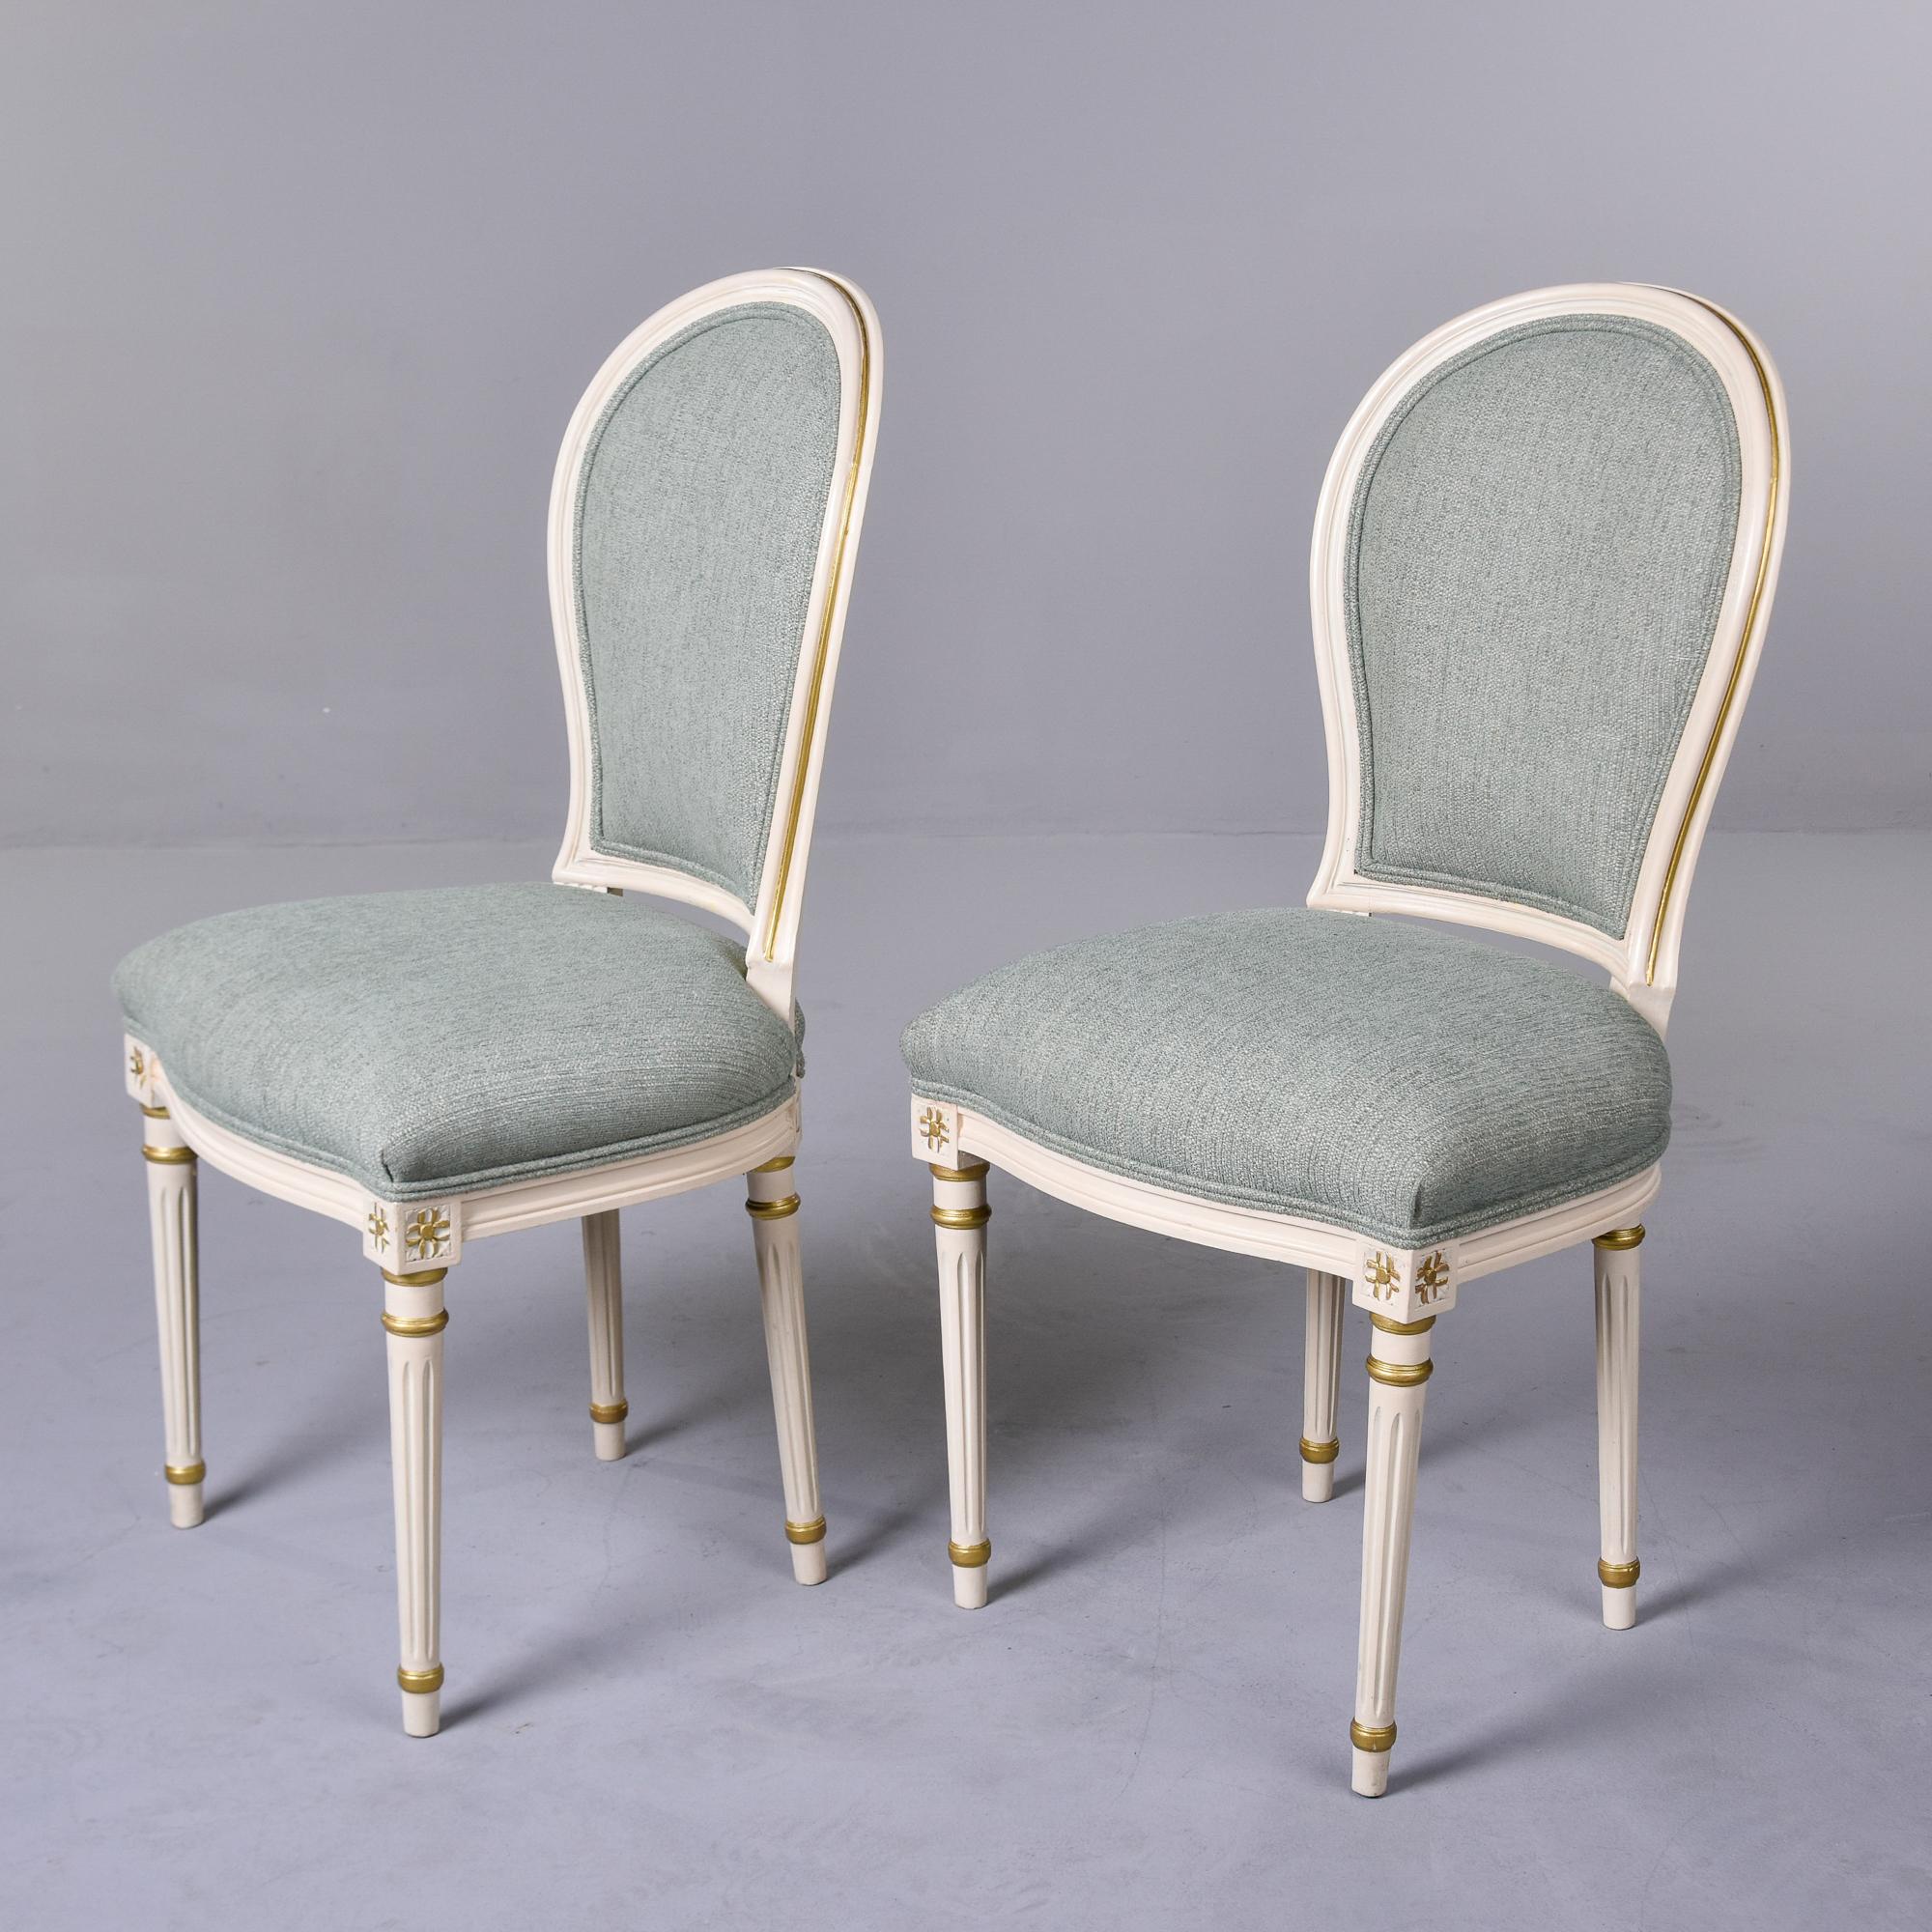 Set 6 French Early 20th C Louis XVI Style Dining Chairs with New Upholstery 3